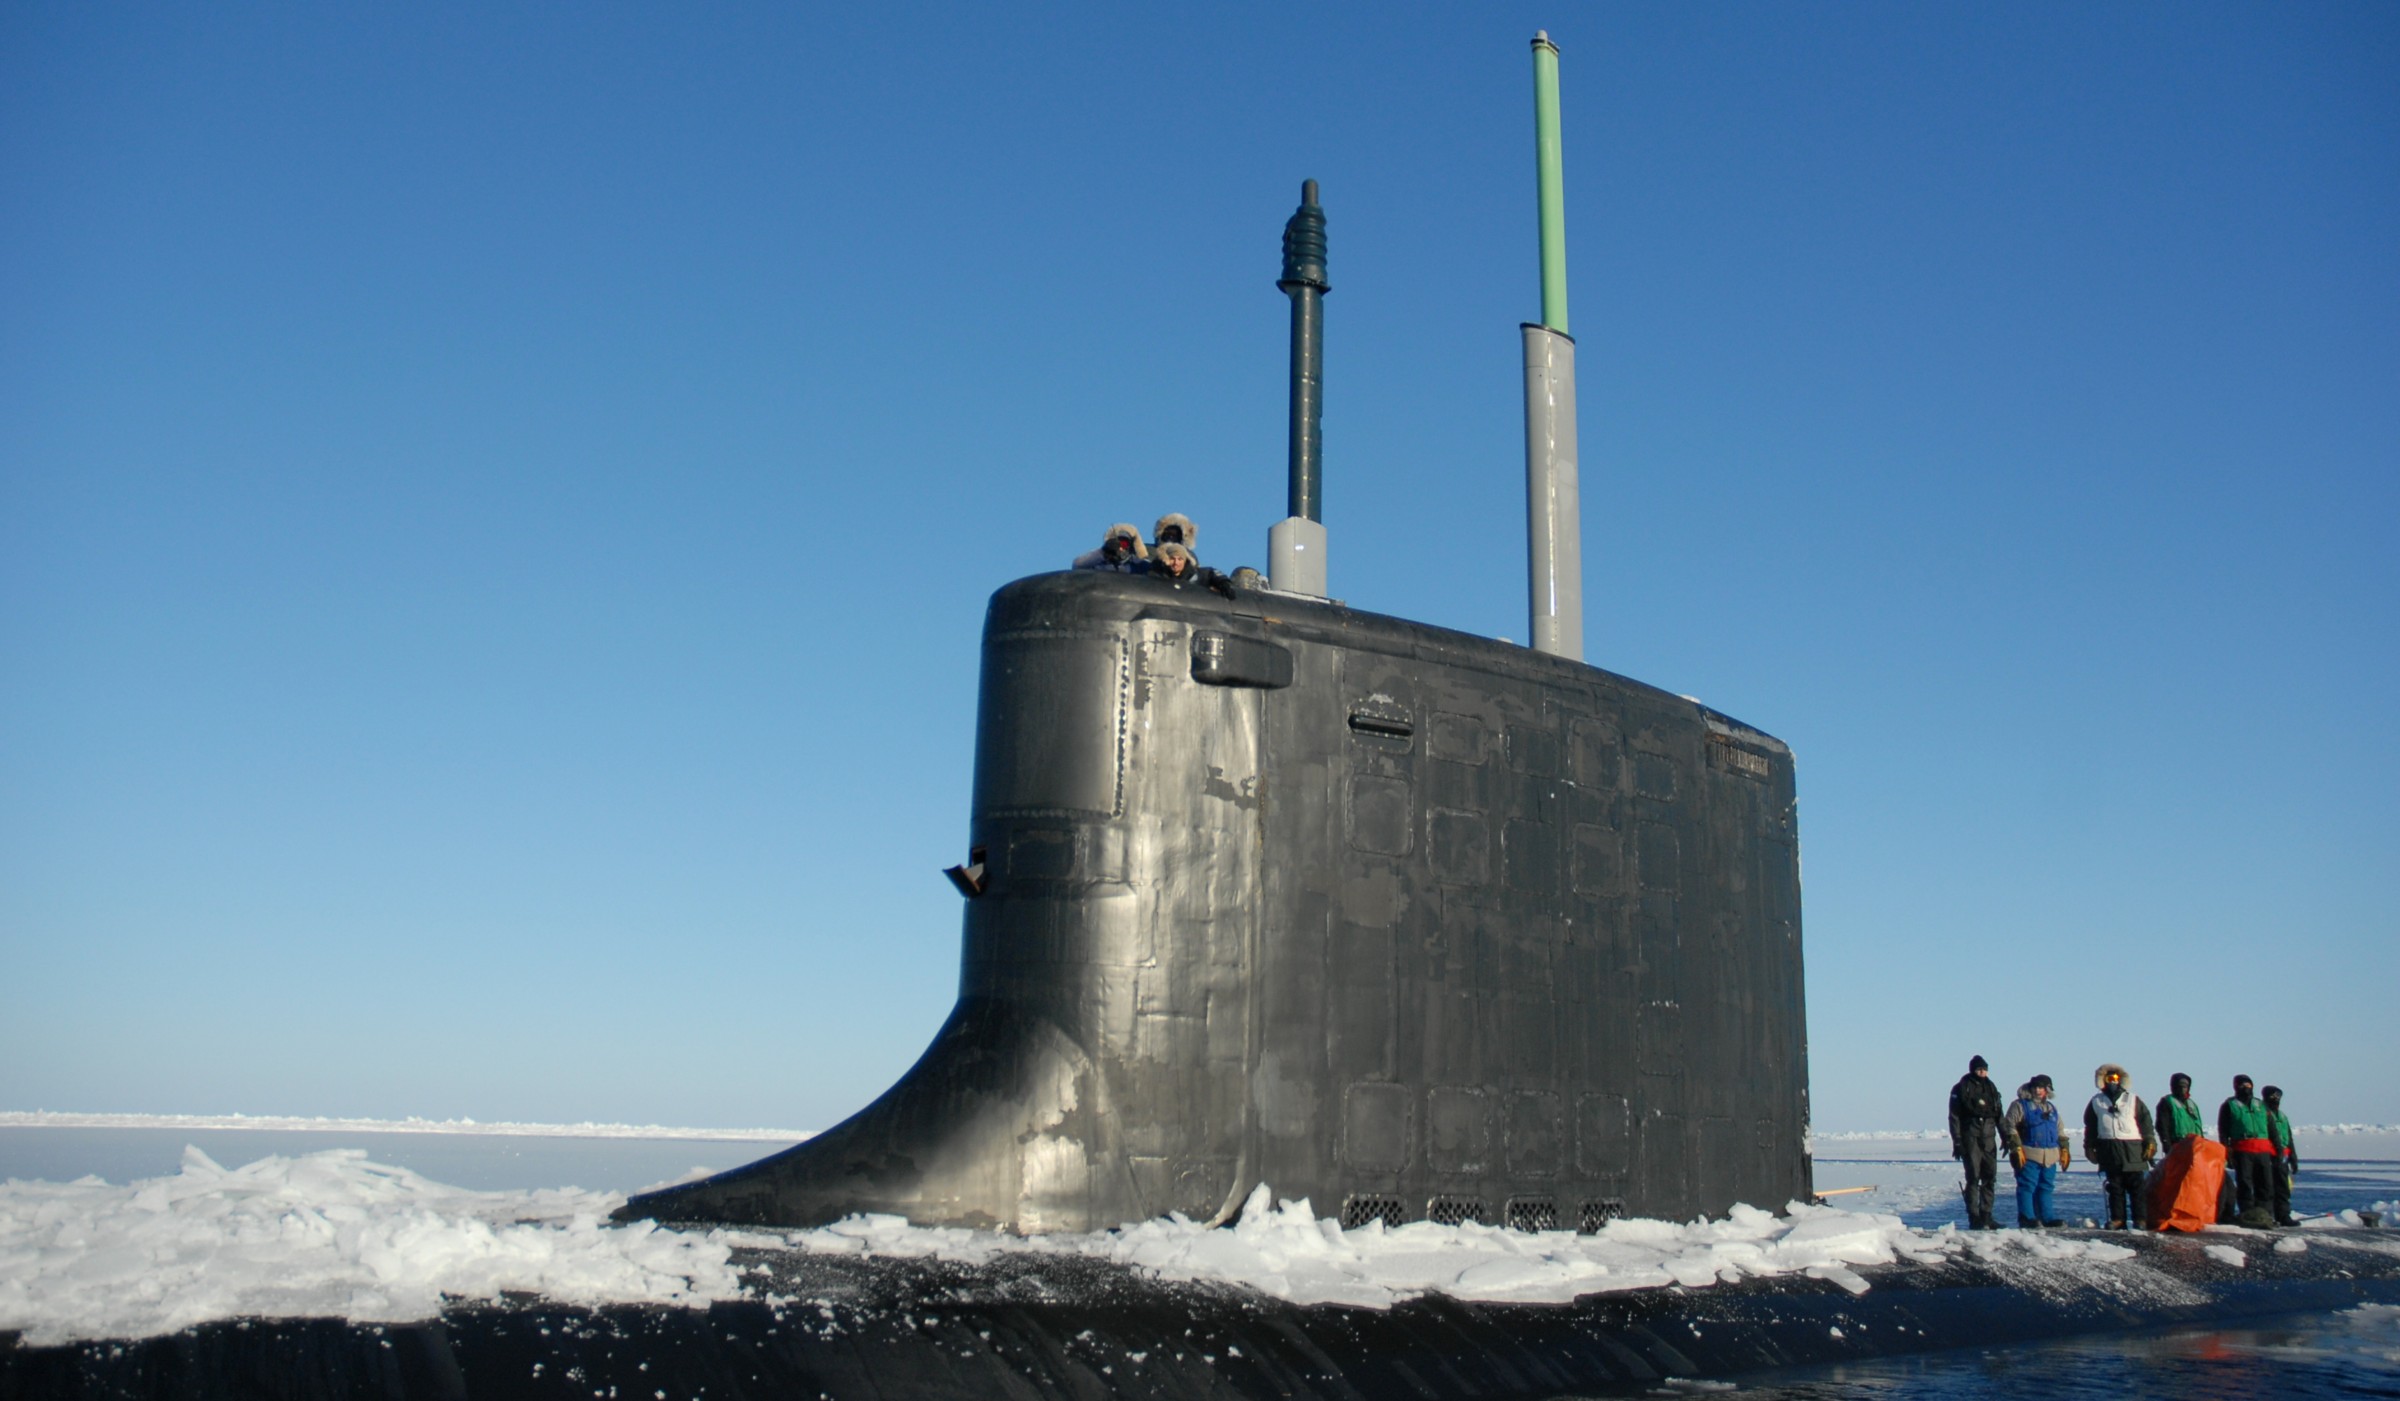 ssn-778 uss new hampshire virginia class attack submarine us navy 09 exercise icex 2011